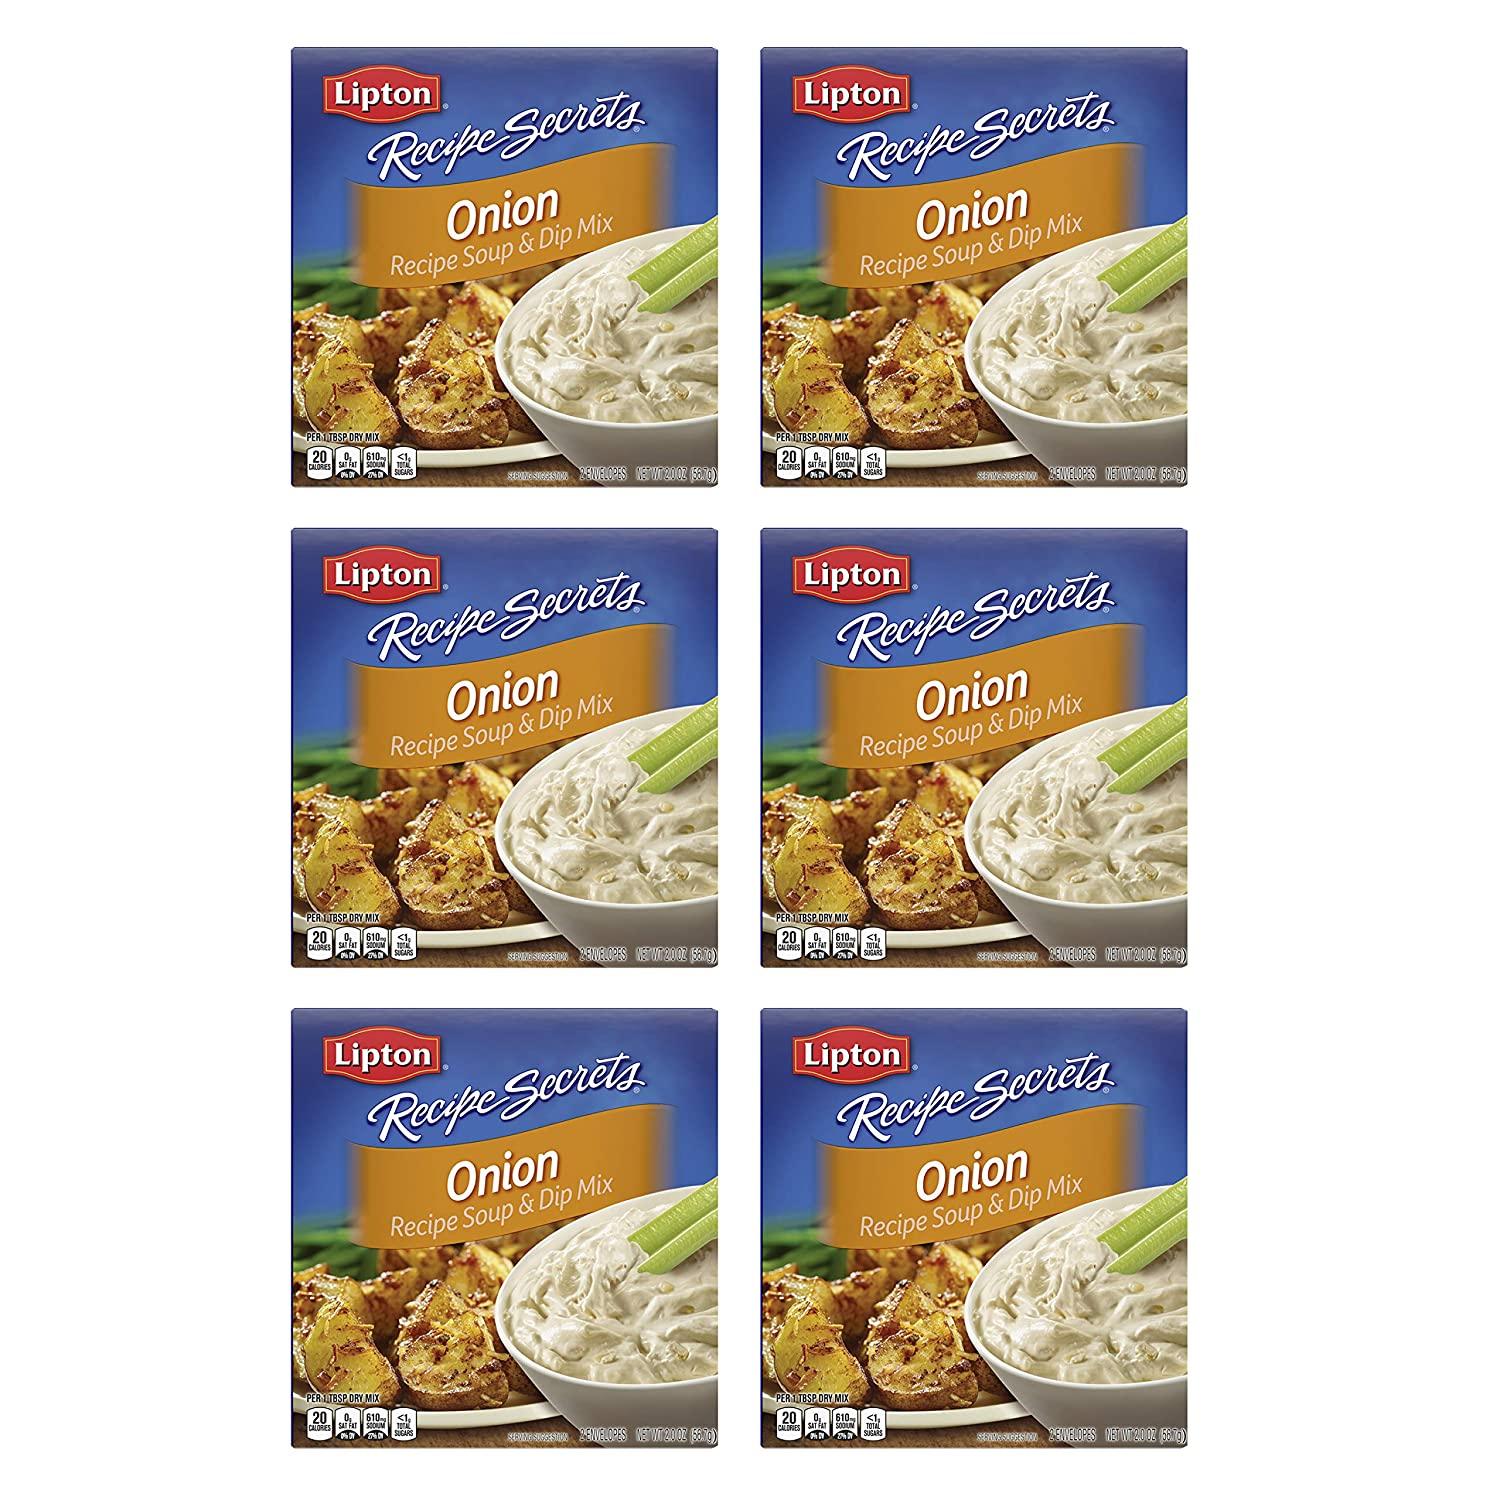 Lipton Recipe Secrets Soup and Dip Mix Onion 6-Pack for $2.94